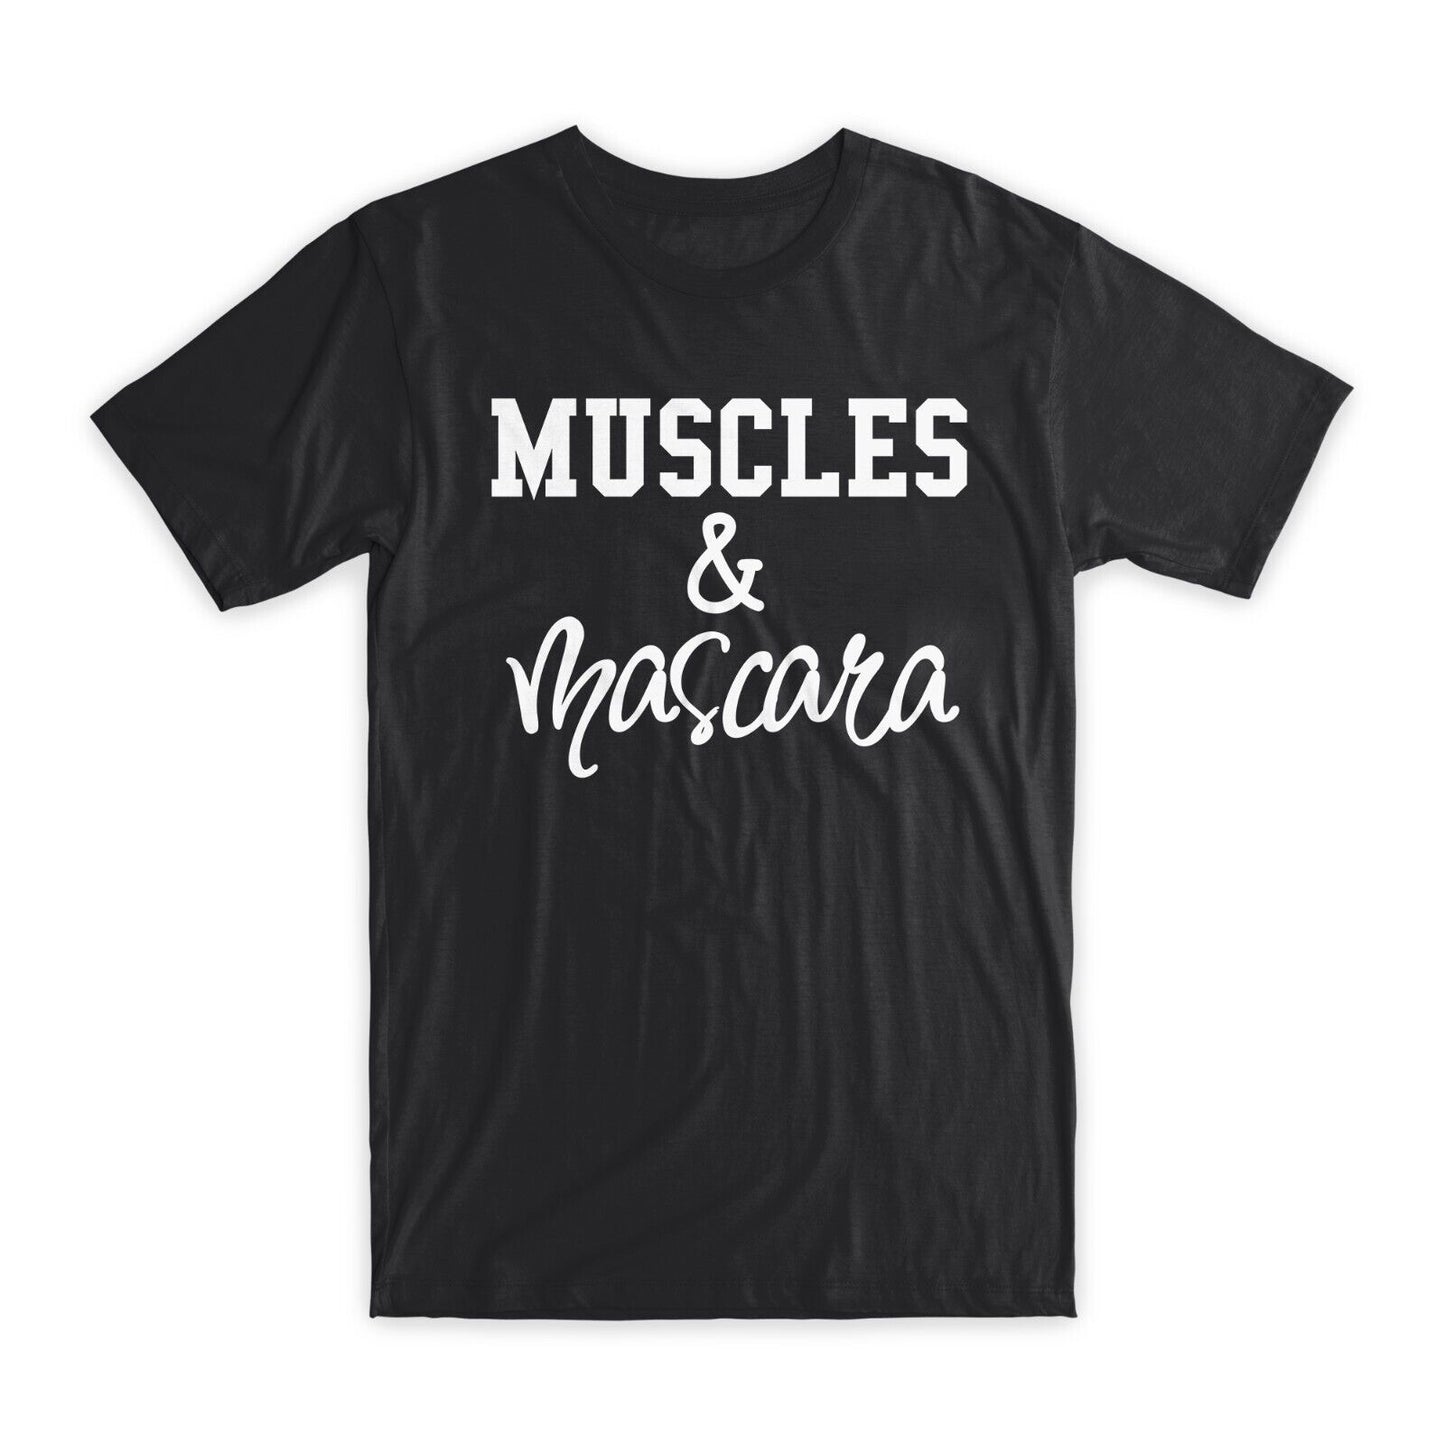 Muscles & Mascara Print T-Shirt Premium Soft Cotton Crew Neck Funny Tee Gift NEW